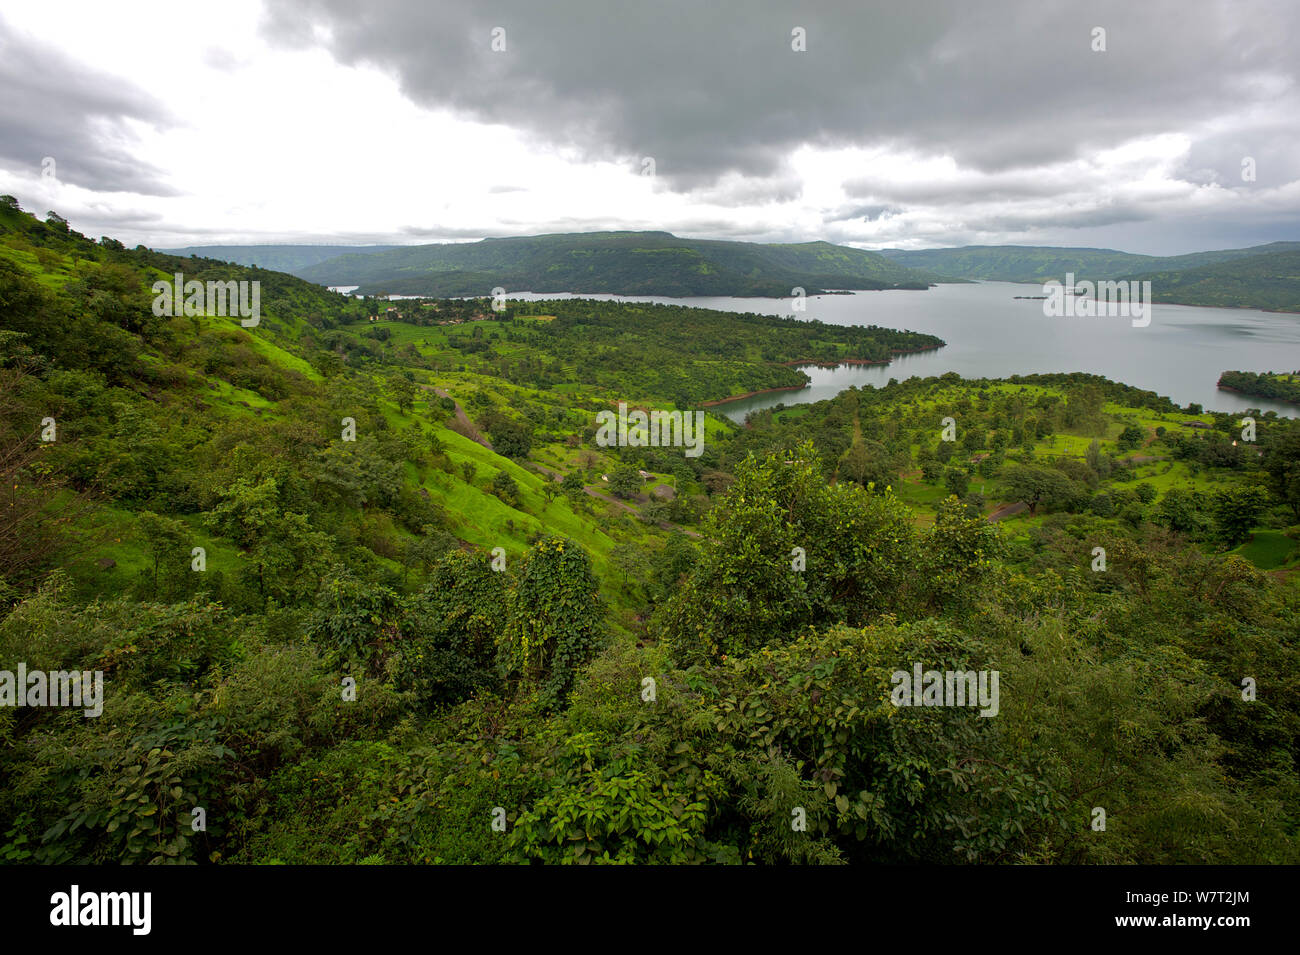 Landscape of Koyna Lake, with houses, during the monsoon. Western Ghats, India. Stock Photo